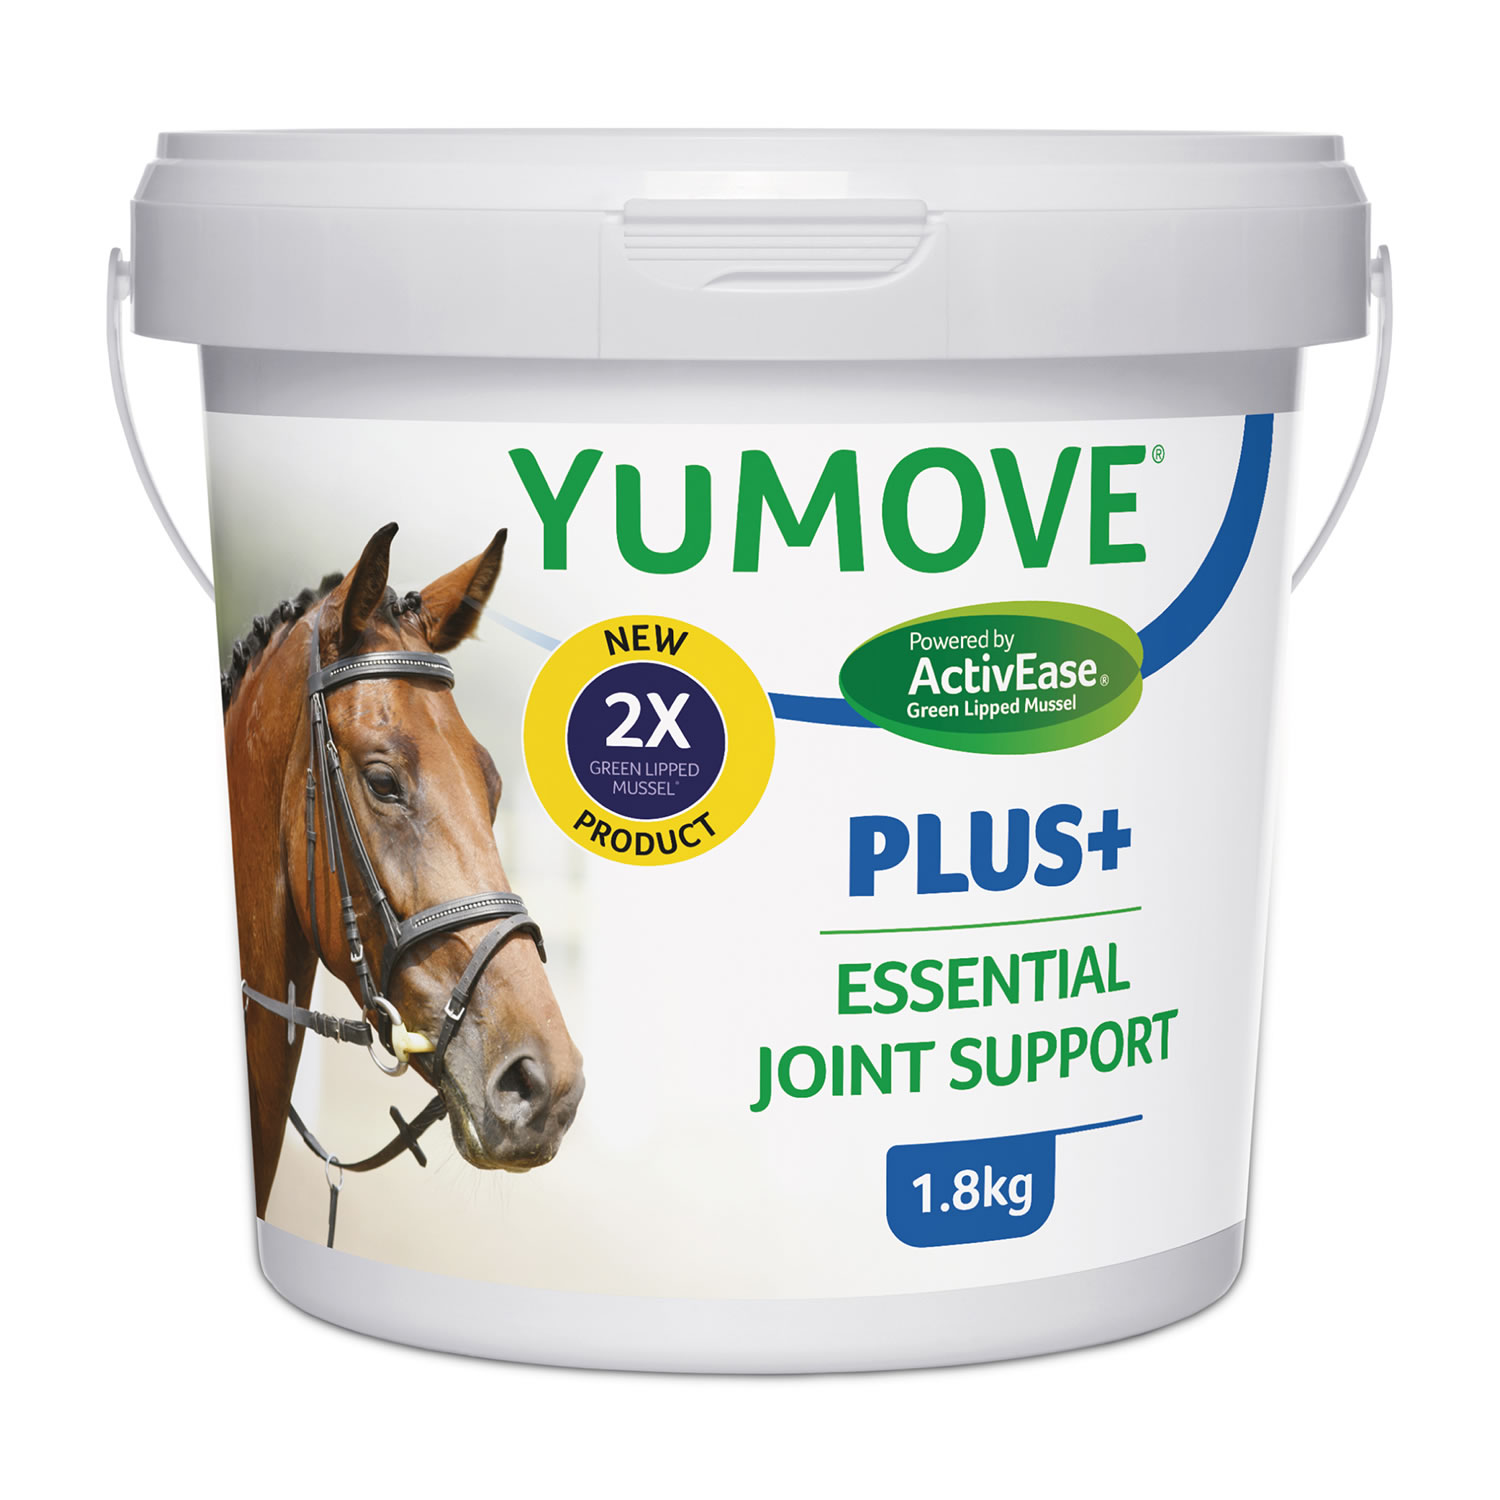 LINTBELLS YUMOVE HORSE PLUS+ ESSENTIAL JOINT SUPPORT 1.8 KG 1.8 KG